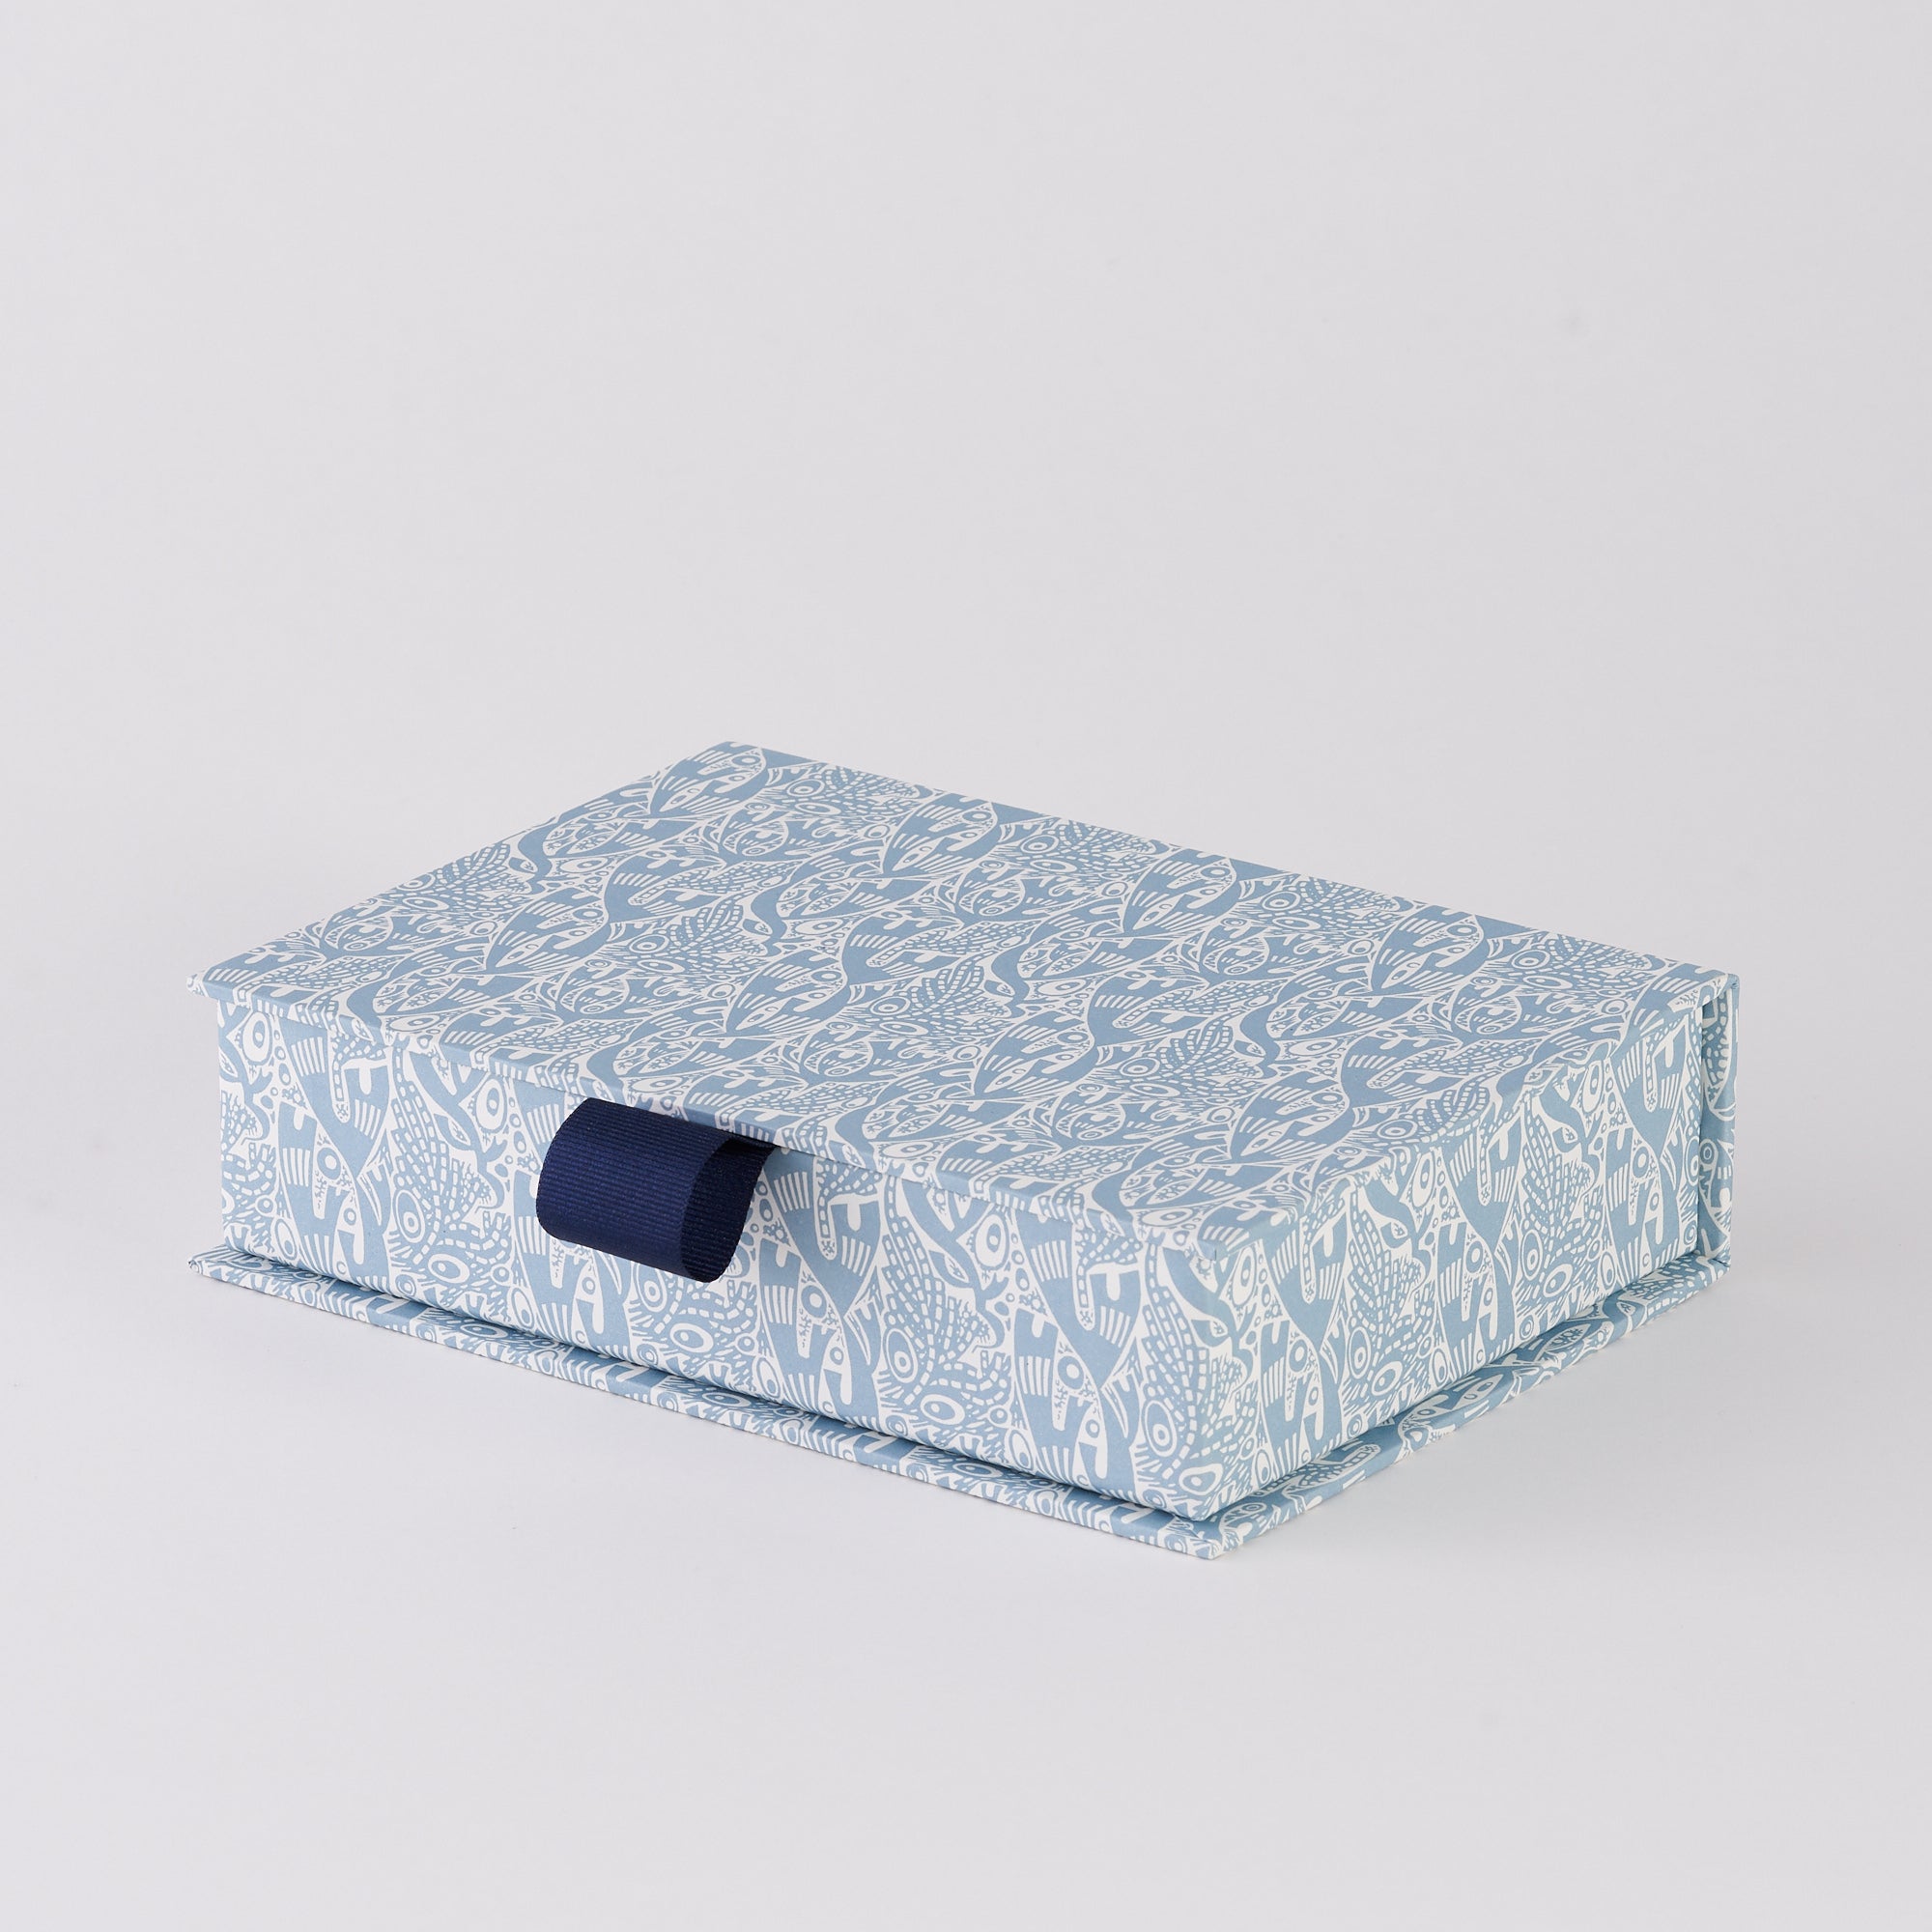 Rockpool Patterned Paper Box - Angie Lewin - St. Jude's Prints